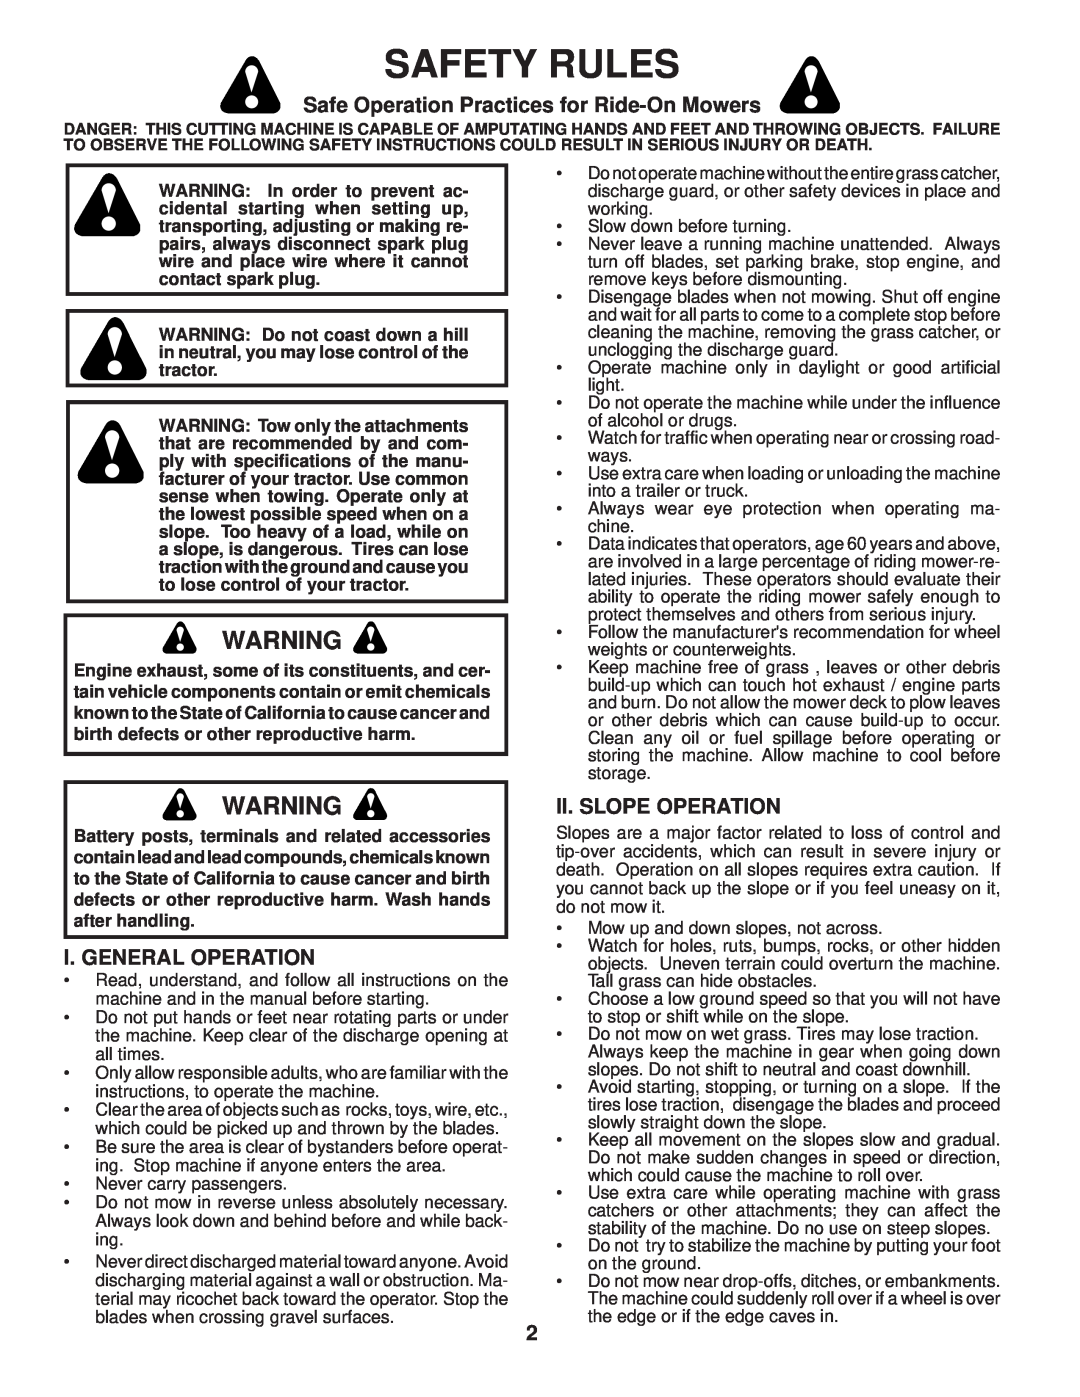 Poulan PB24H54YT Safety Rules, Safe Operation Practices for Ride-On Mowers, I. General Operation, Ii. Slope Operation 